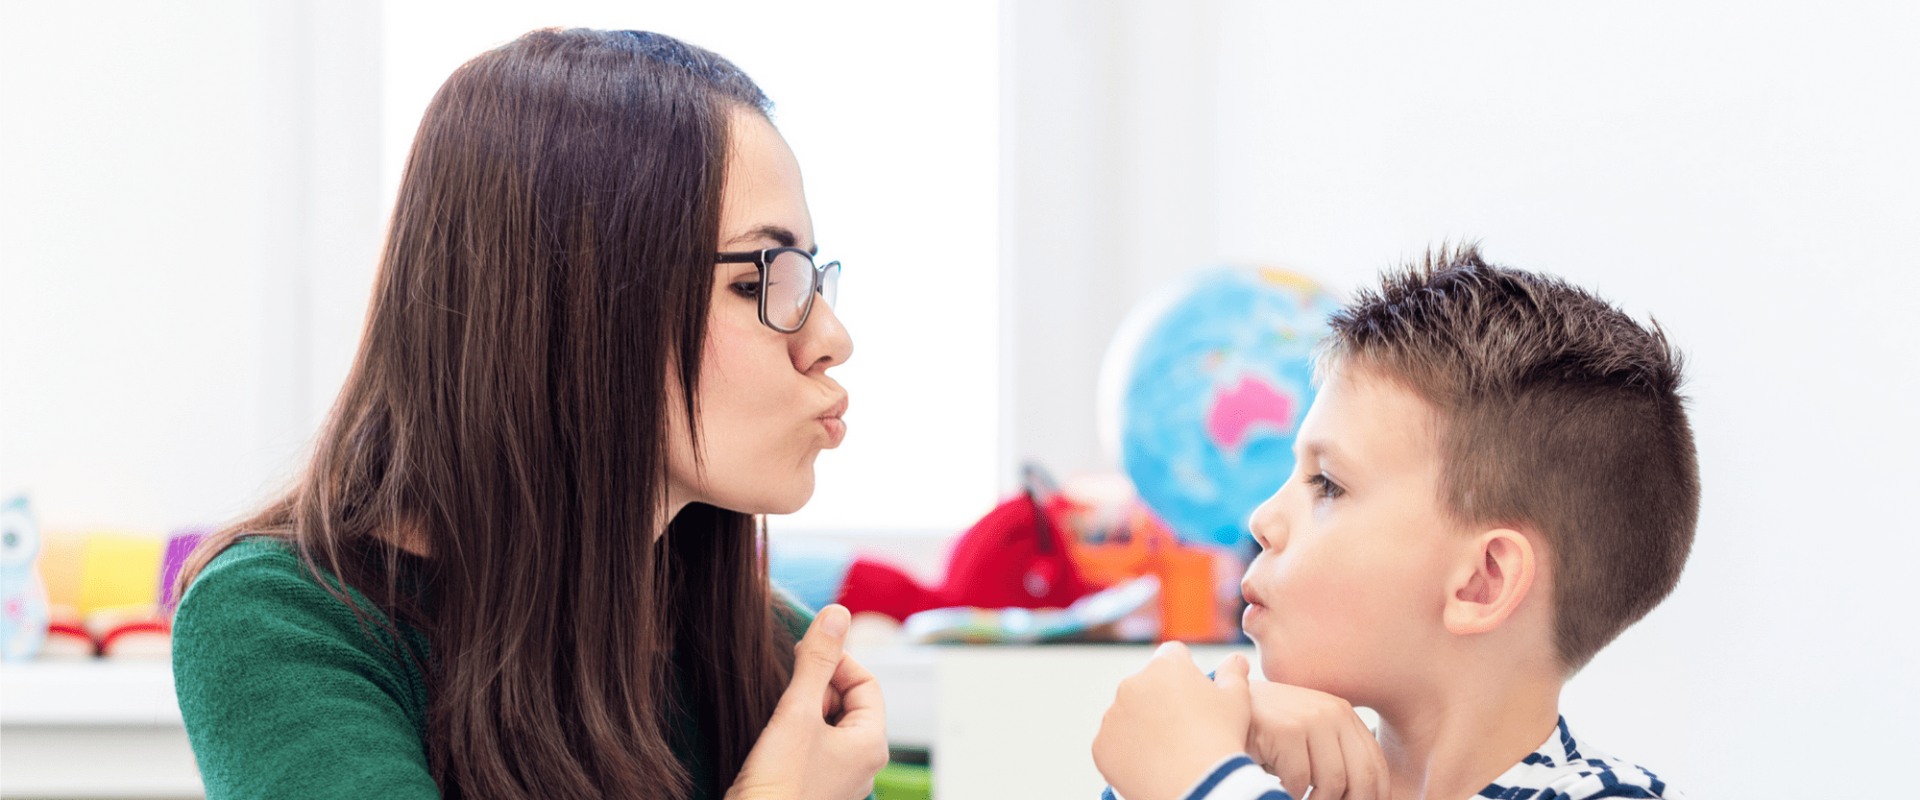 Why is parental support important for speech and language development?